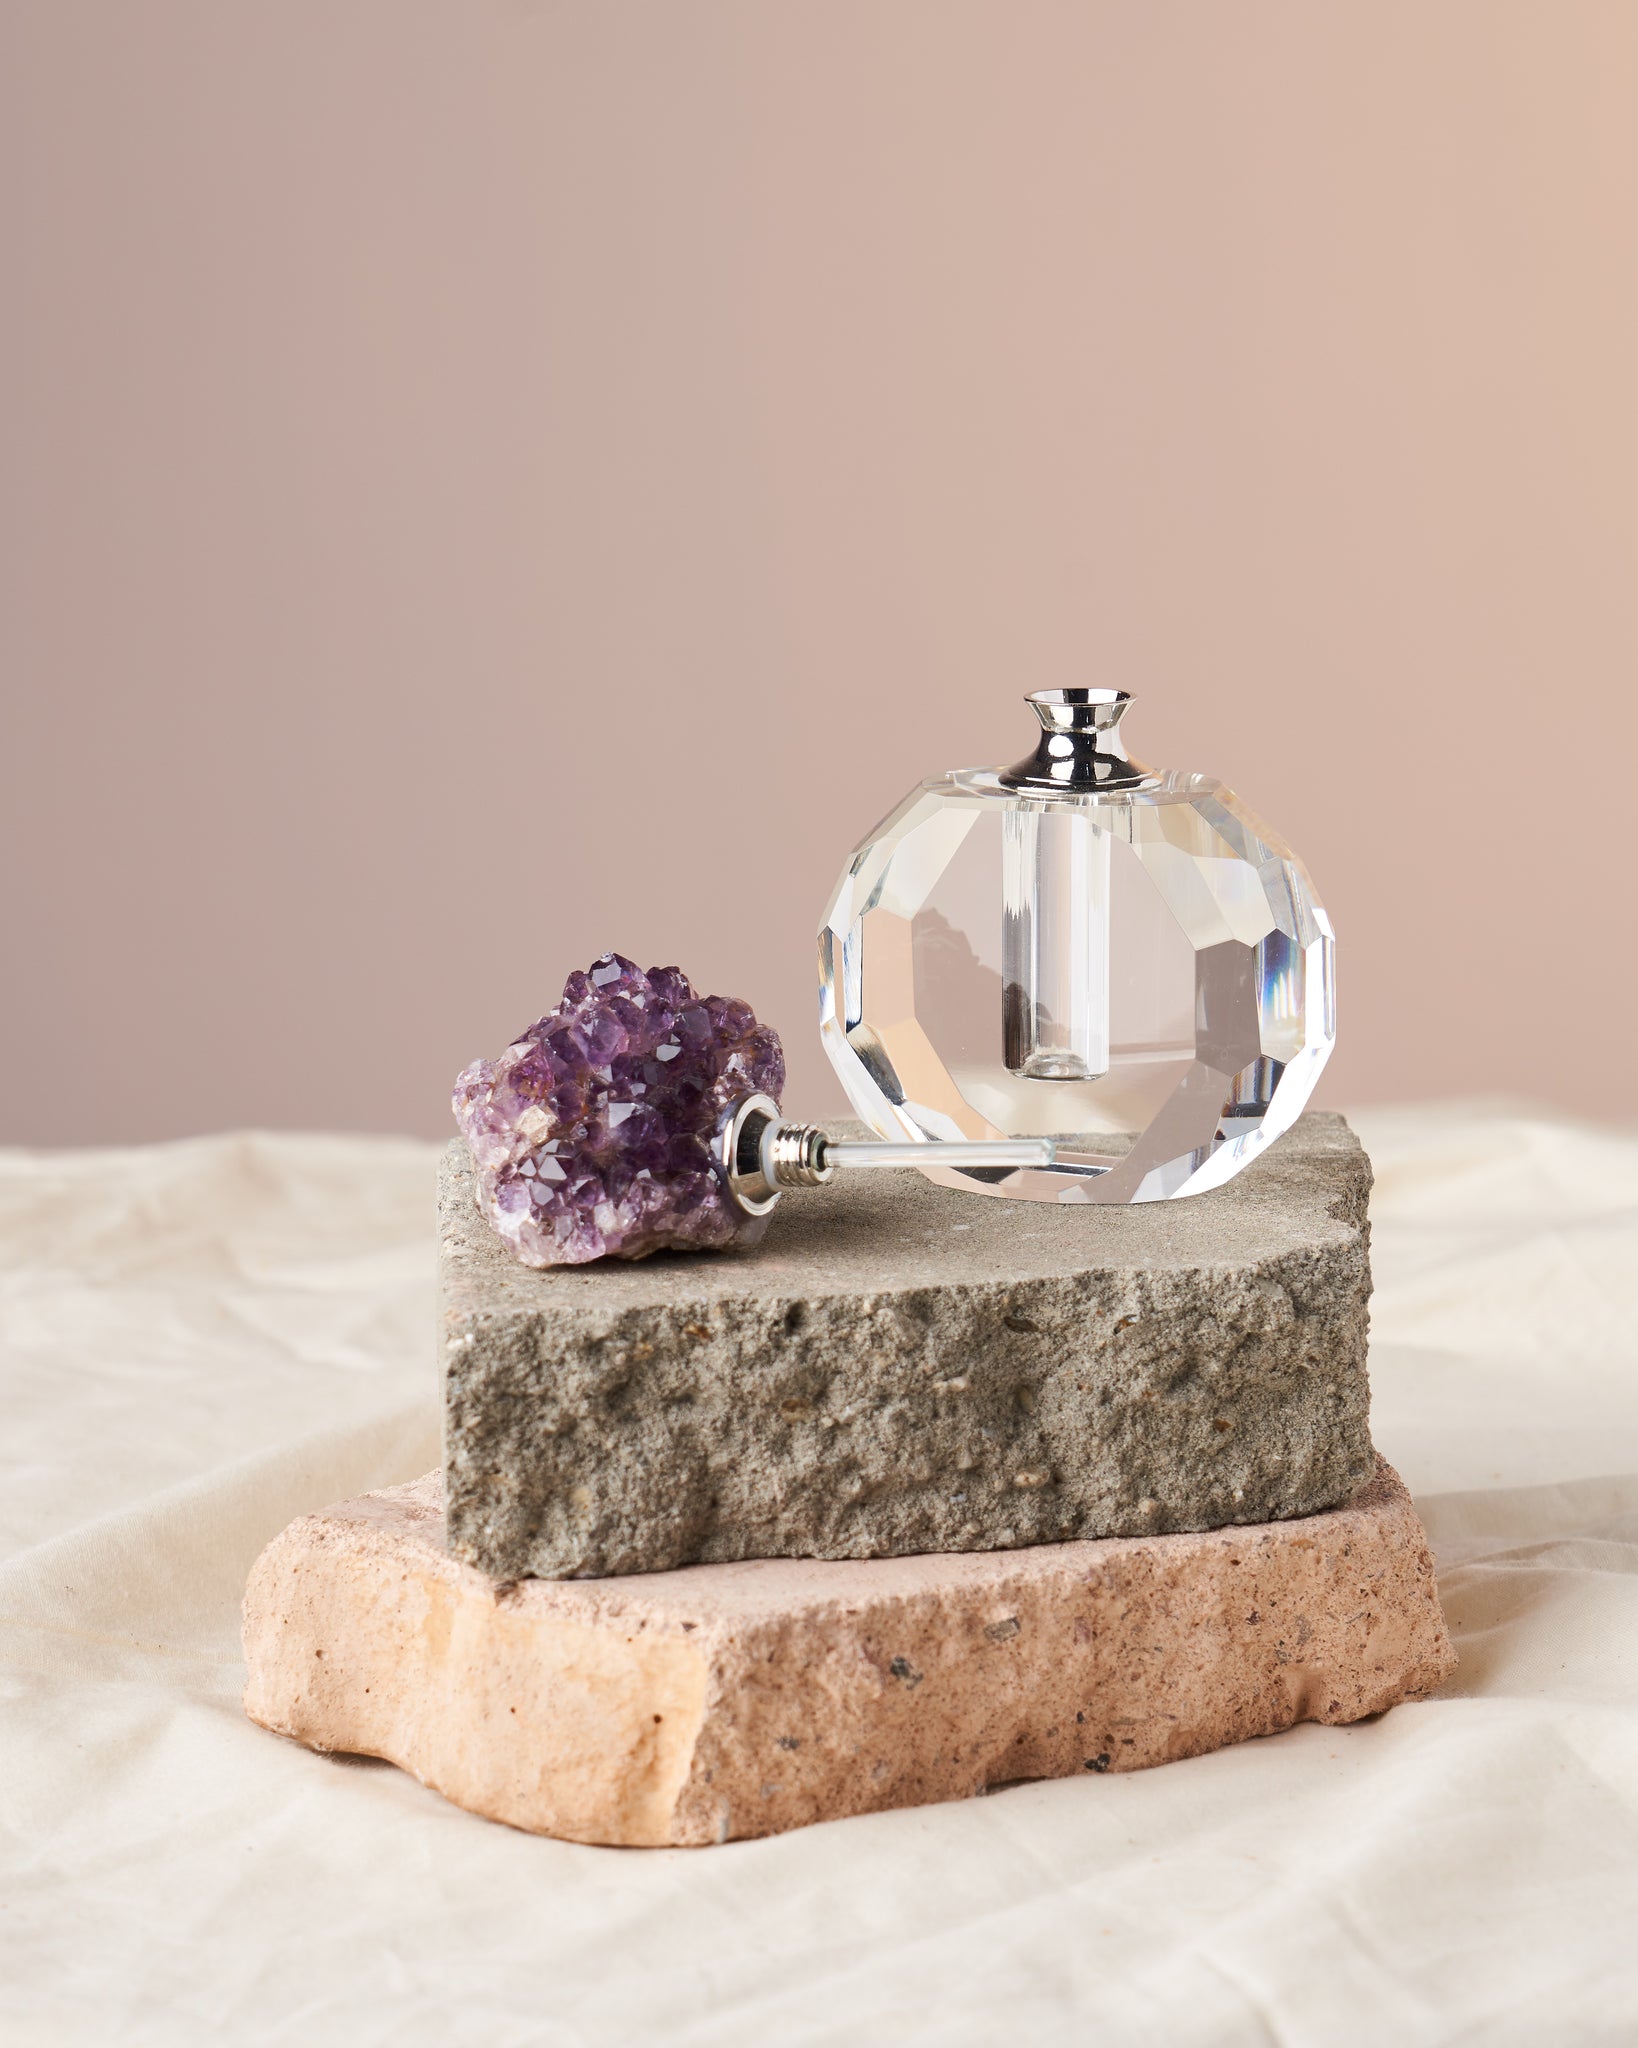 Amethyst Crystal Perfume Bottles - Rose Quartz-Embellished Collection: Elevate your aromatherapy with these amethyst cluster bottles. Available in Mama, Baby, and Zaddy sizes. Ideal for holding perfumes and essential oils. Harness the power of intuition, spiritual growth, and protection. Compact, elegant designs with varying oil capacities. Great for gifting.